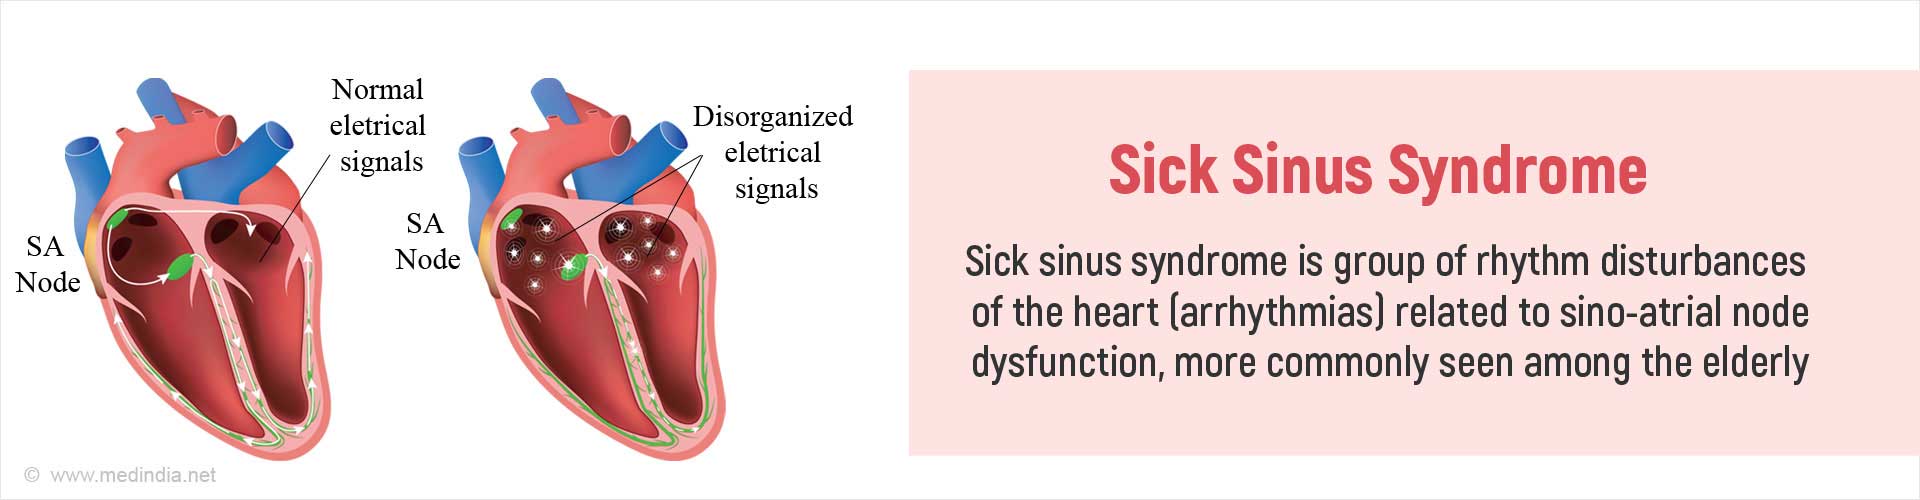 diagnosis and treatment of sick sinus syndrome